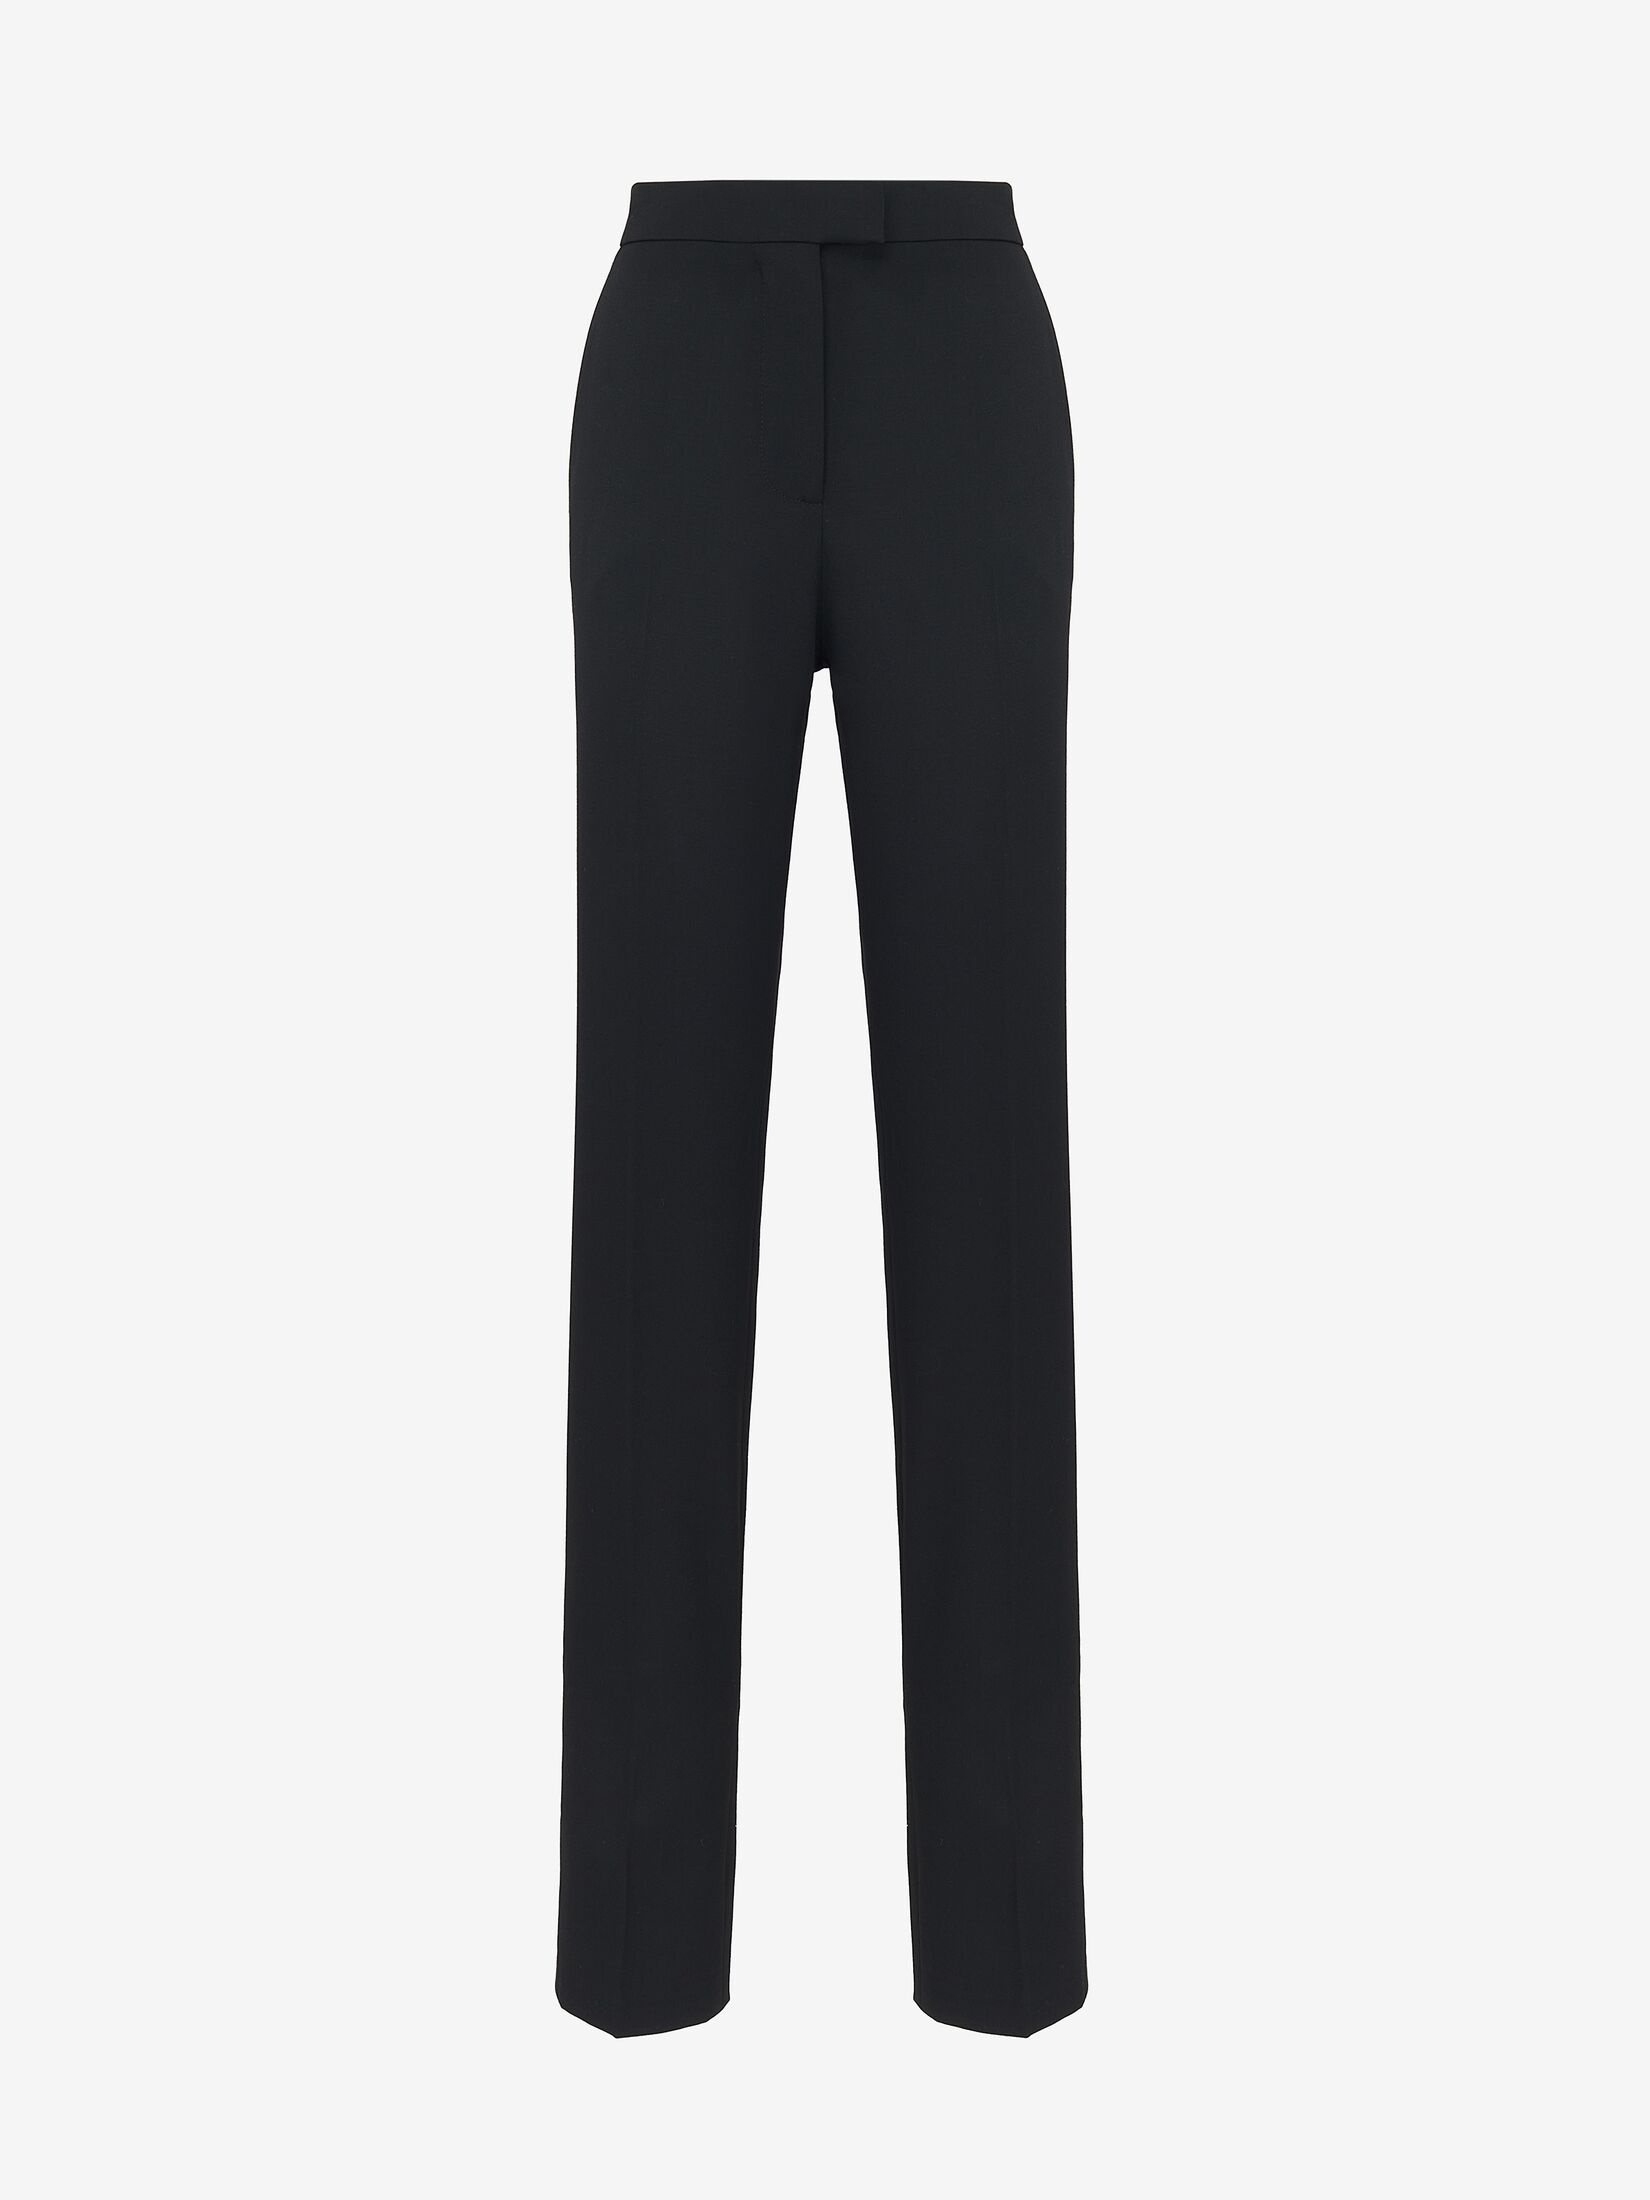 Women's High-waisted Cigarette Trousers in Black - 1